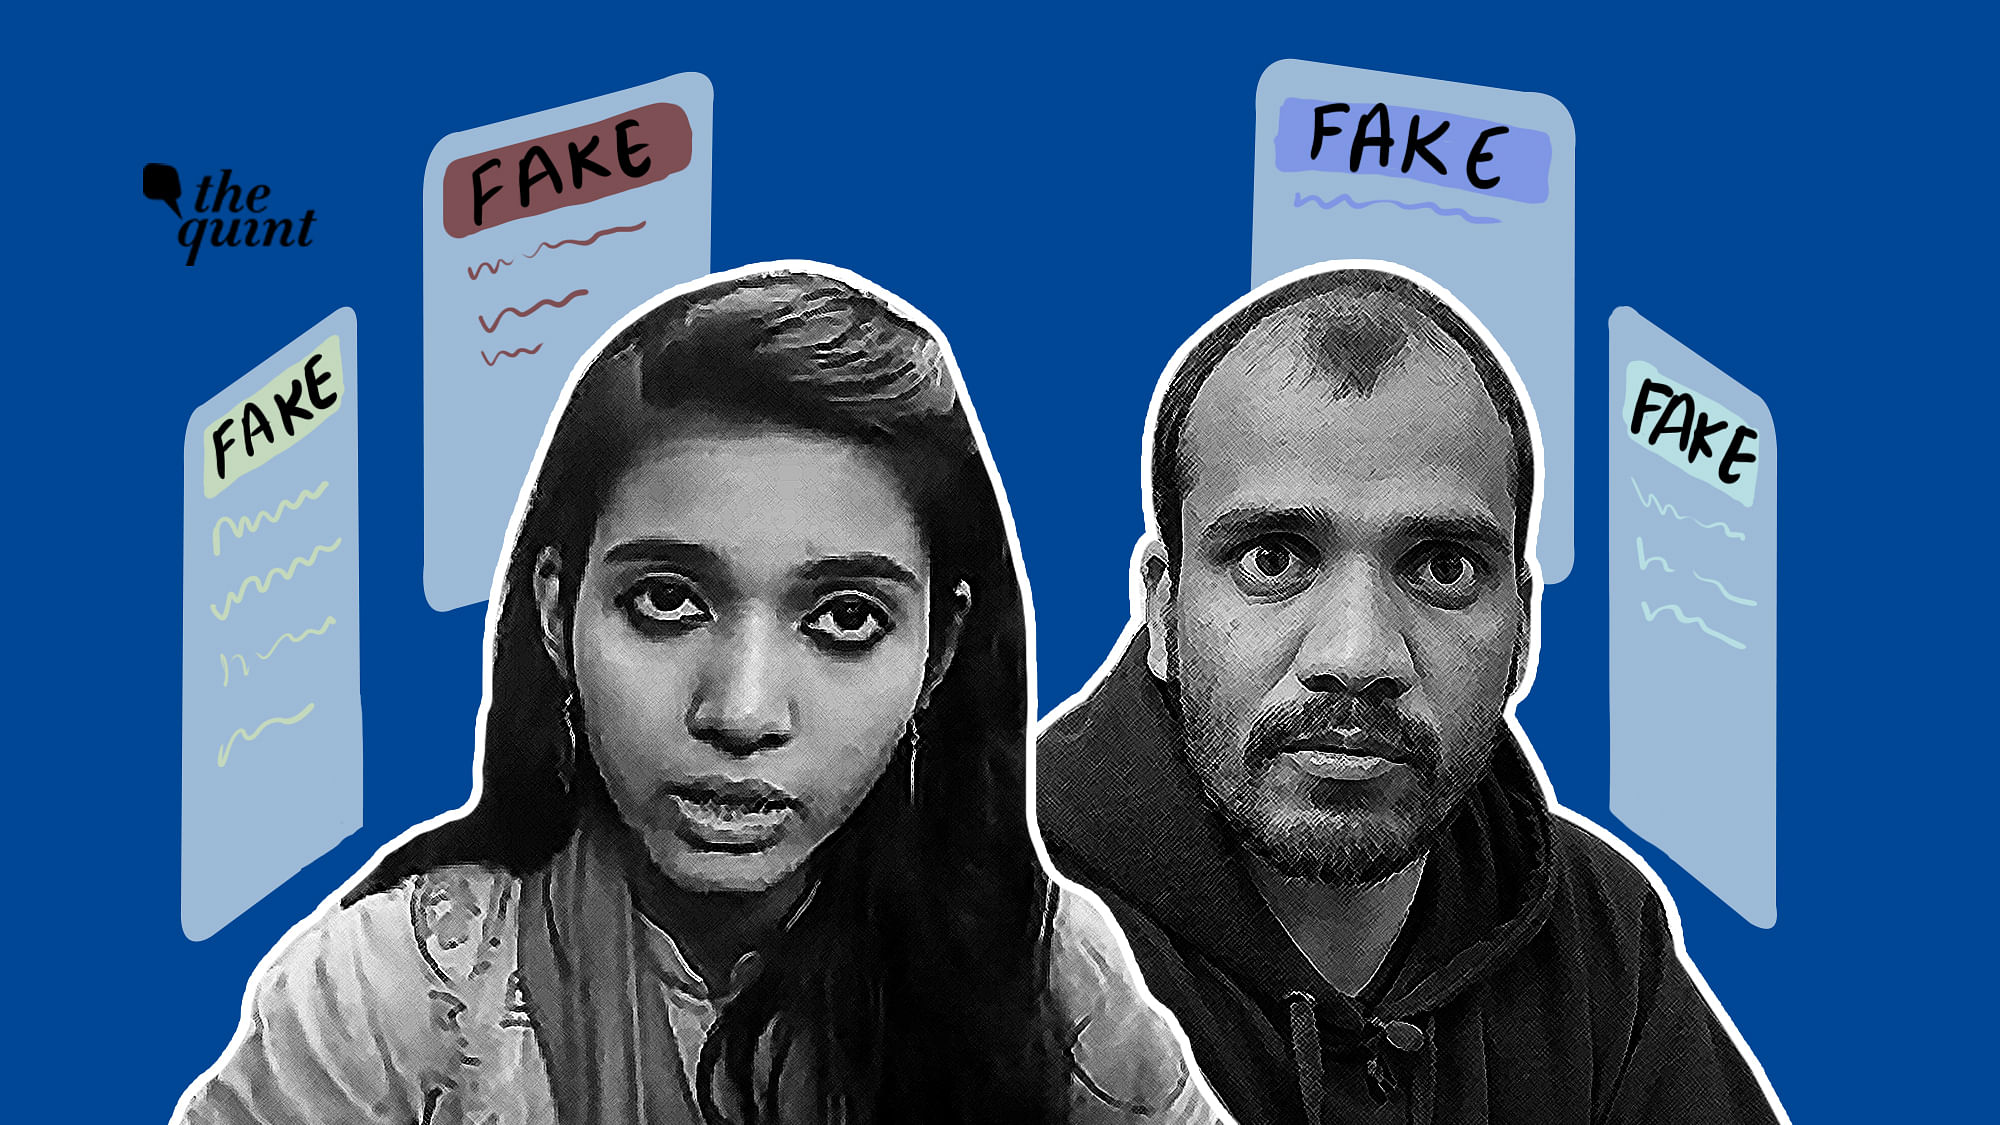 The Quint spoke to some of the people who became the target of fake news and how these events impacted their lives.